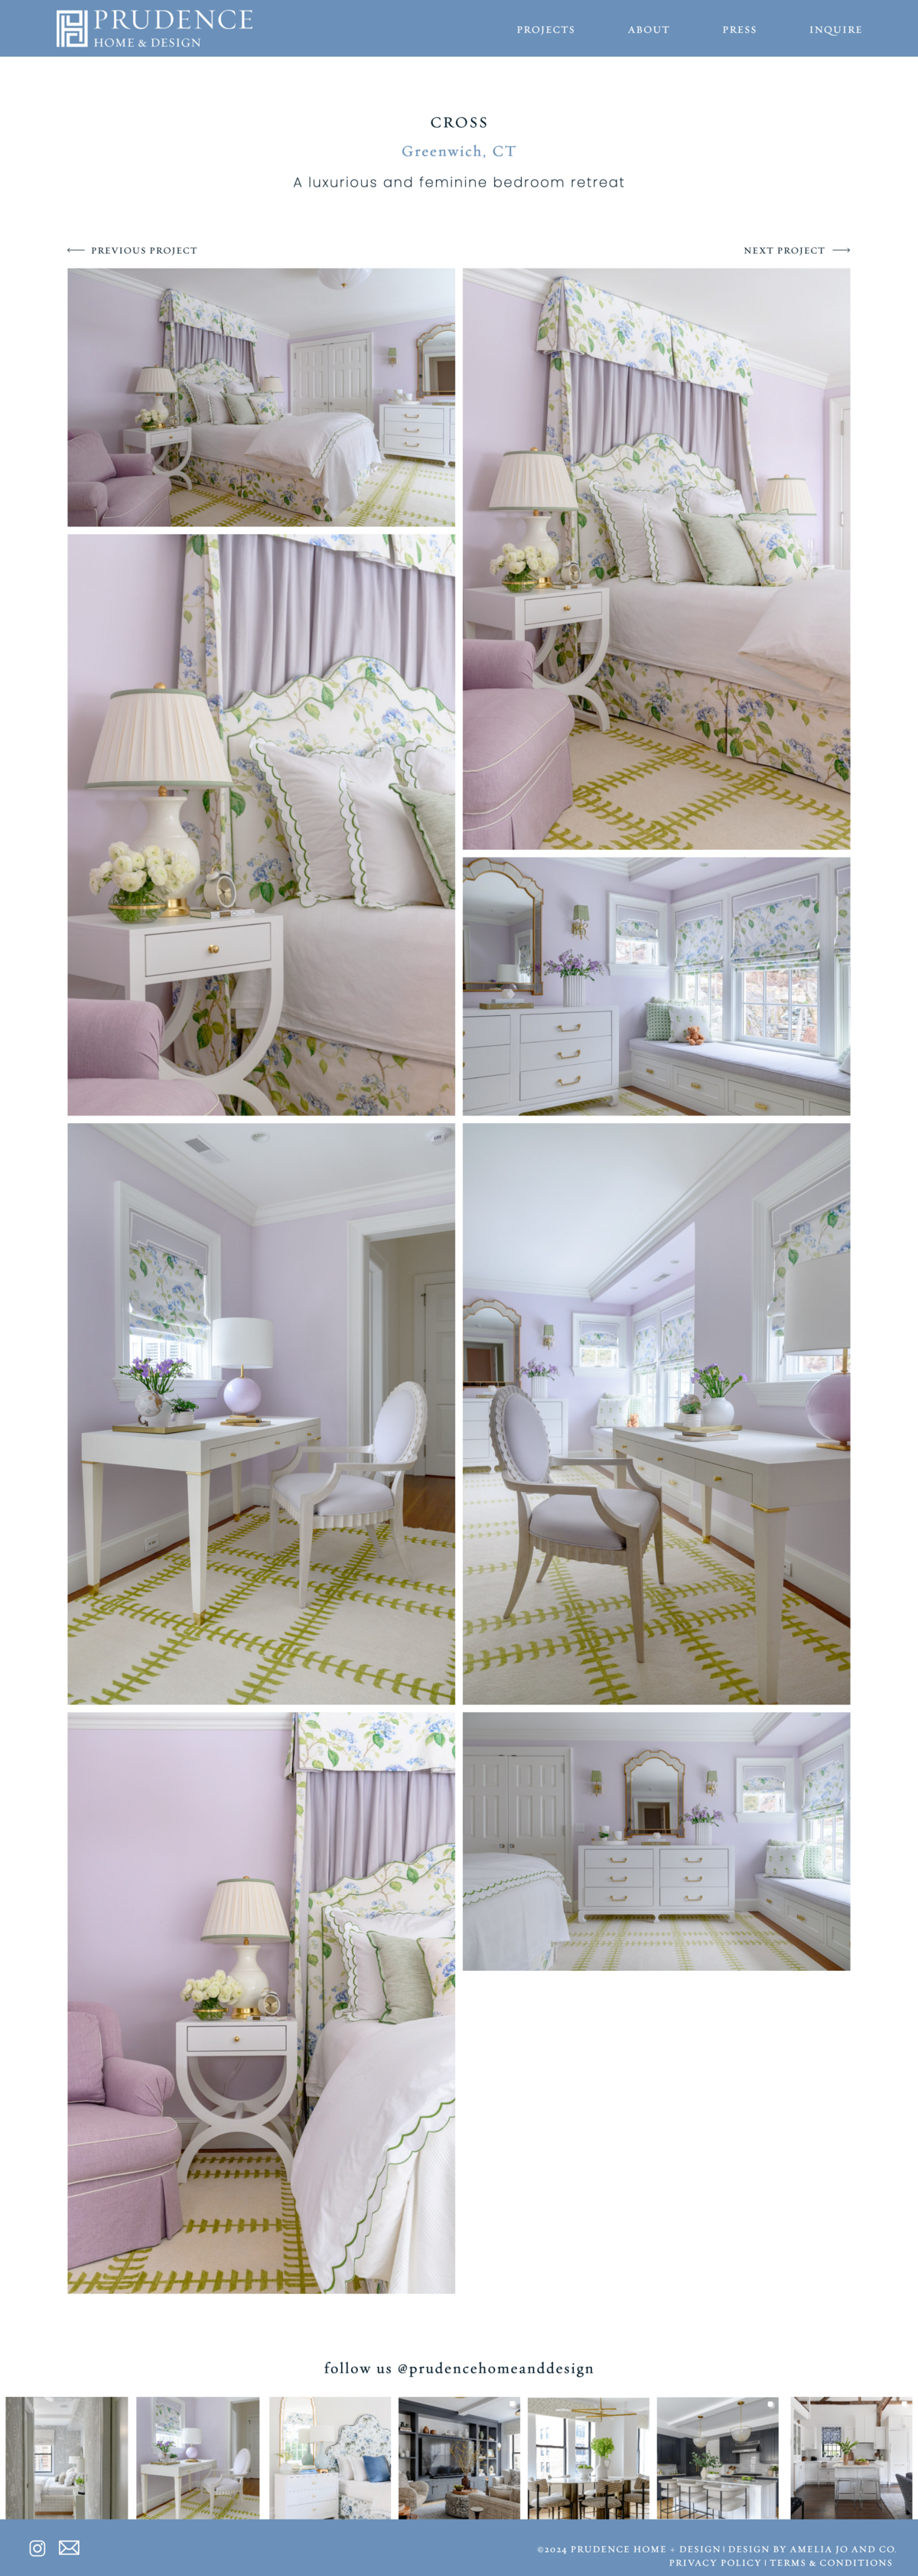 Homepage design of Prudence Home & Design project page featuring a feminine bedroom interior